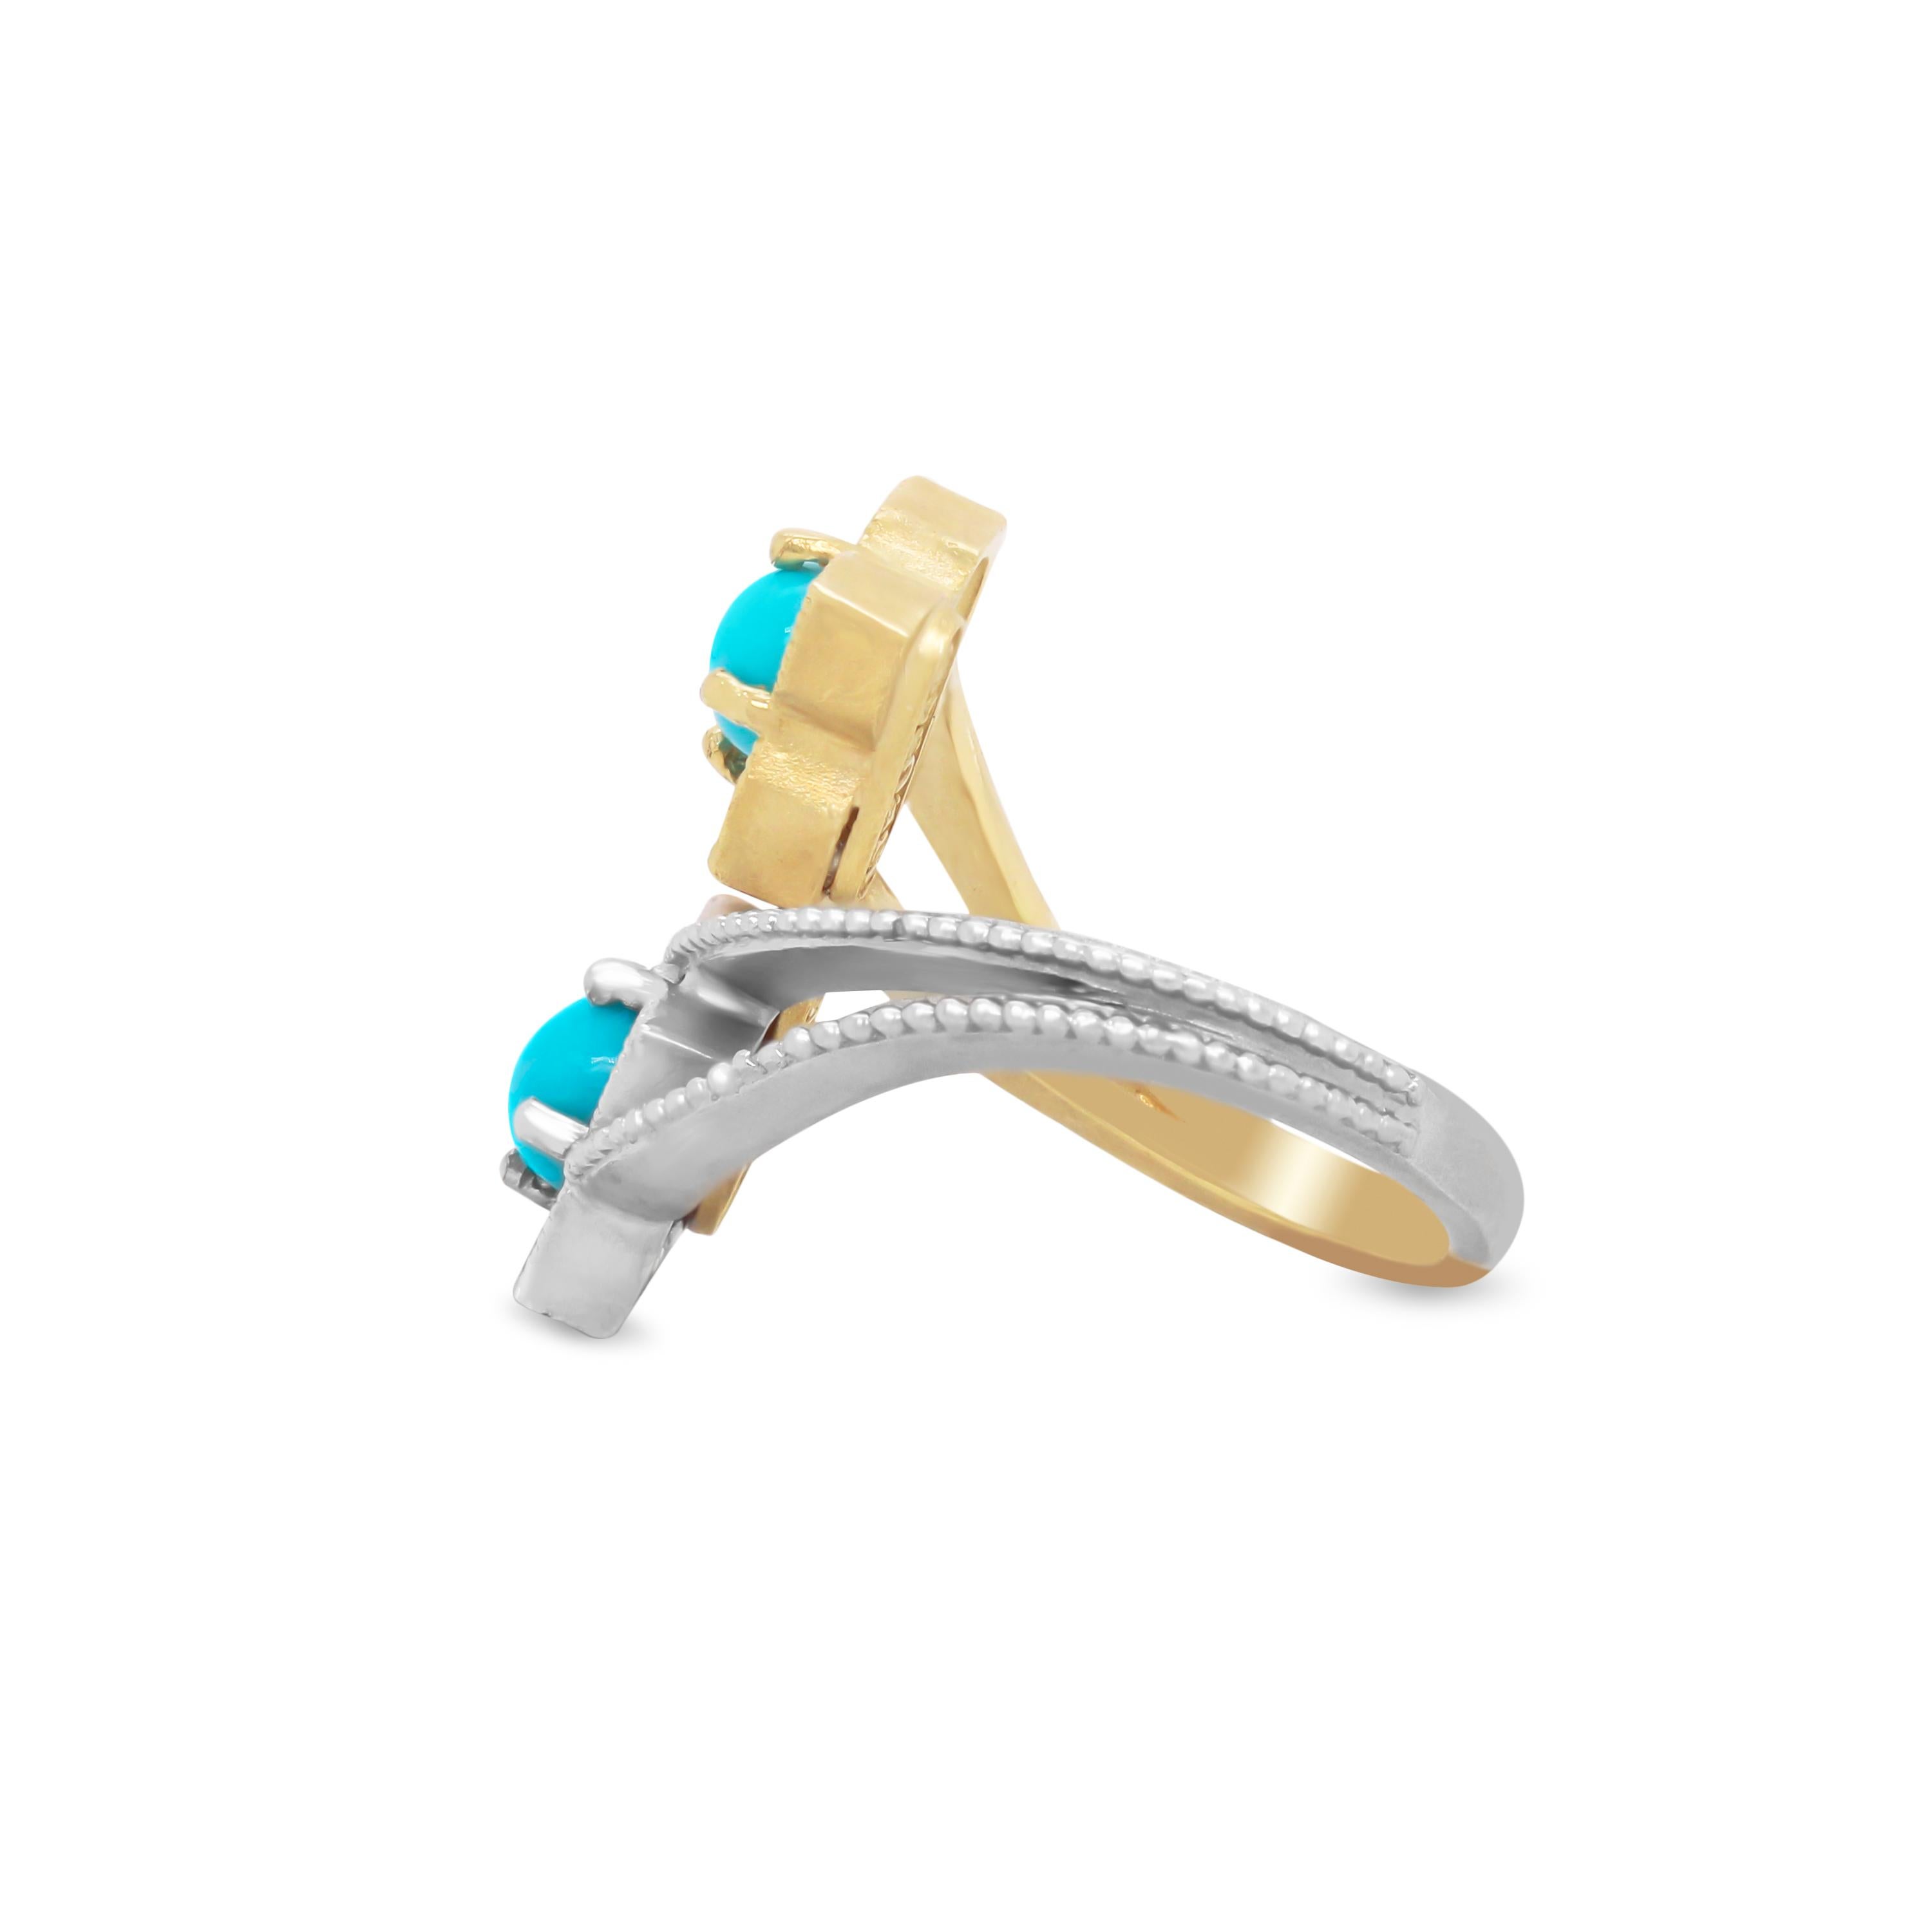 Stambolian 18K Yellow White Gold Diamond Sleeping Beauty Turquoise Bypass Ring

This beautiful ring features two sections with sleeping beauty turquoise centers and are surrounded by diamonds.

0.11 carat G color, VS clarity diamonds
1.20 carat